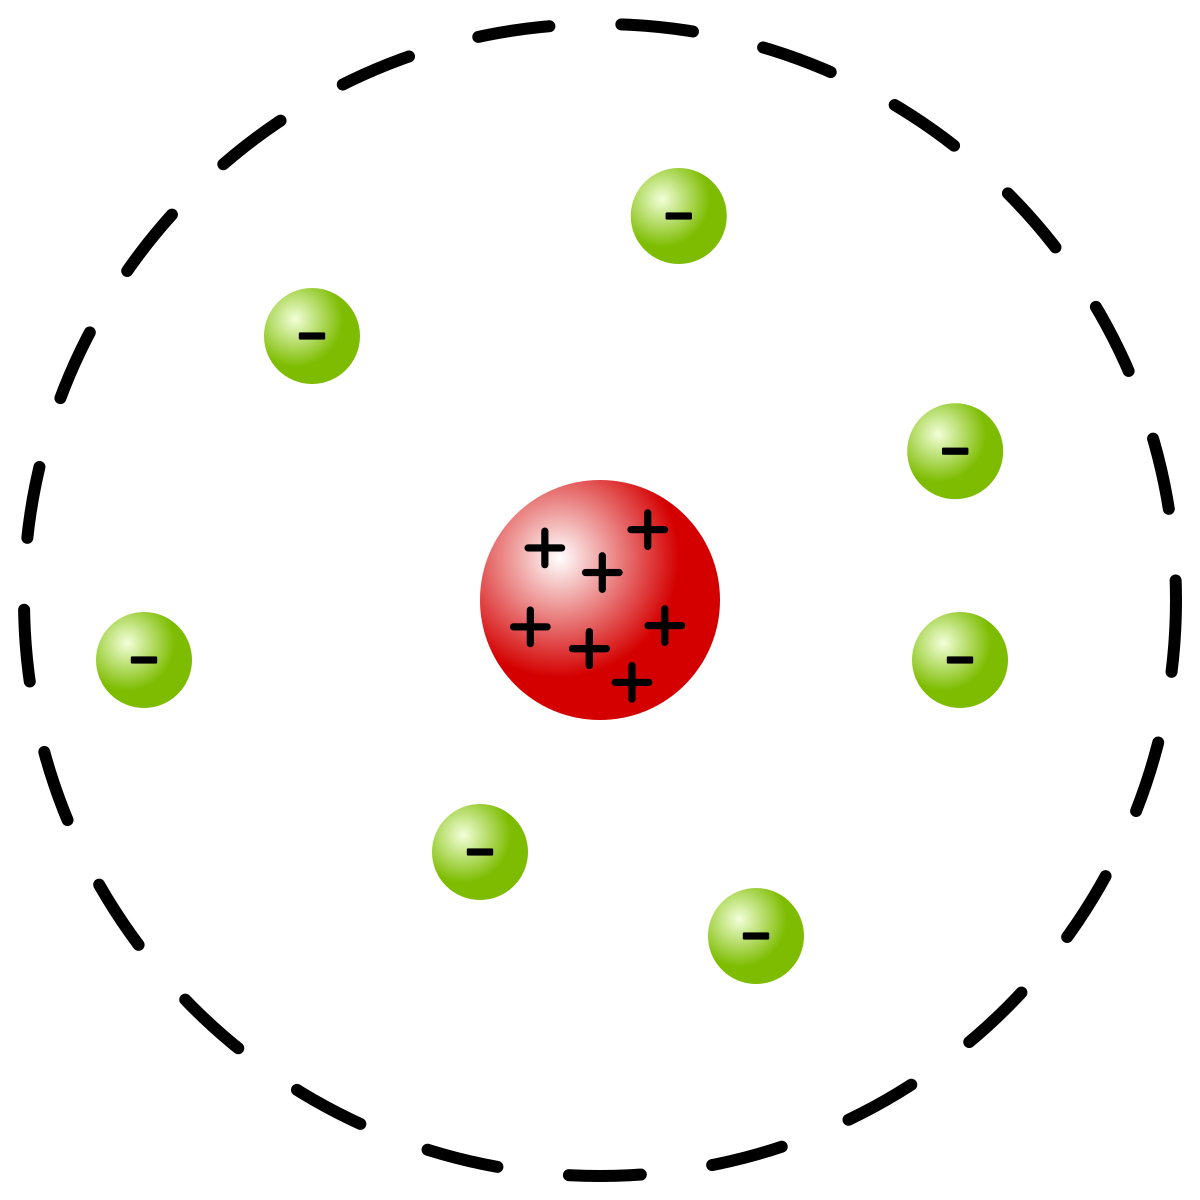 <p>discovered protons and nucleus</p><p>Most of the atom’s mass comes from dense  + nucleus and most of the volume is empty space (electron cloud)</p><p>model: nuclear</p>